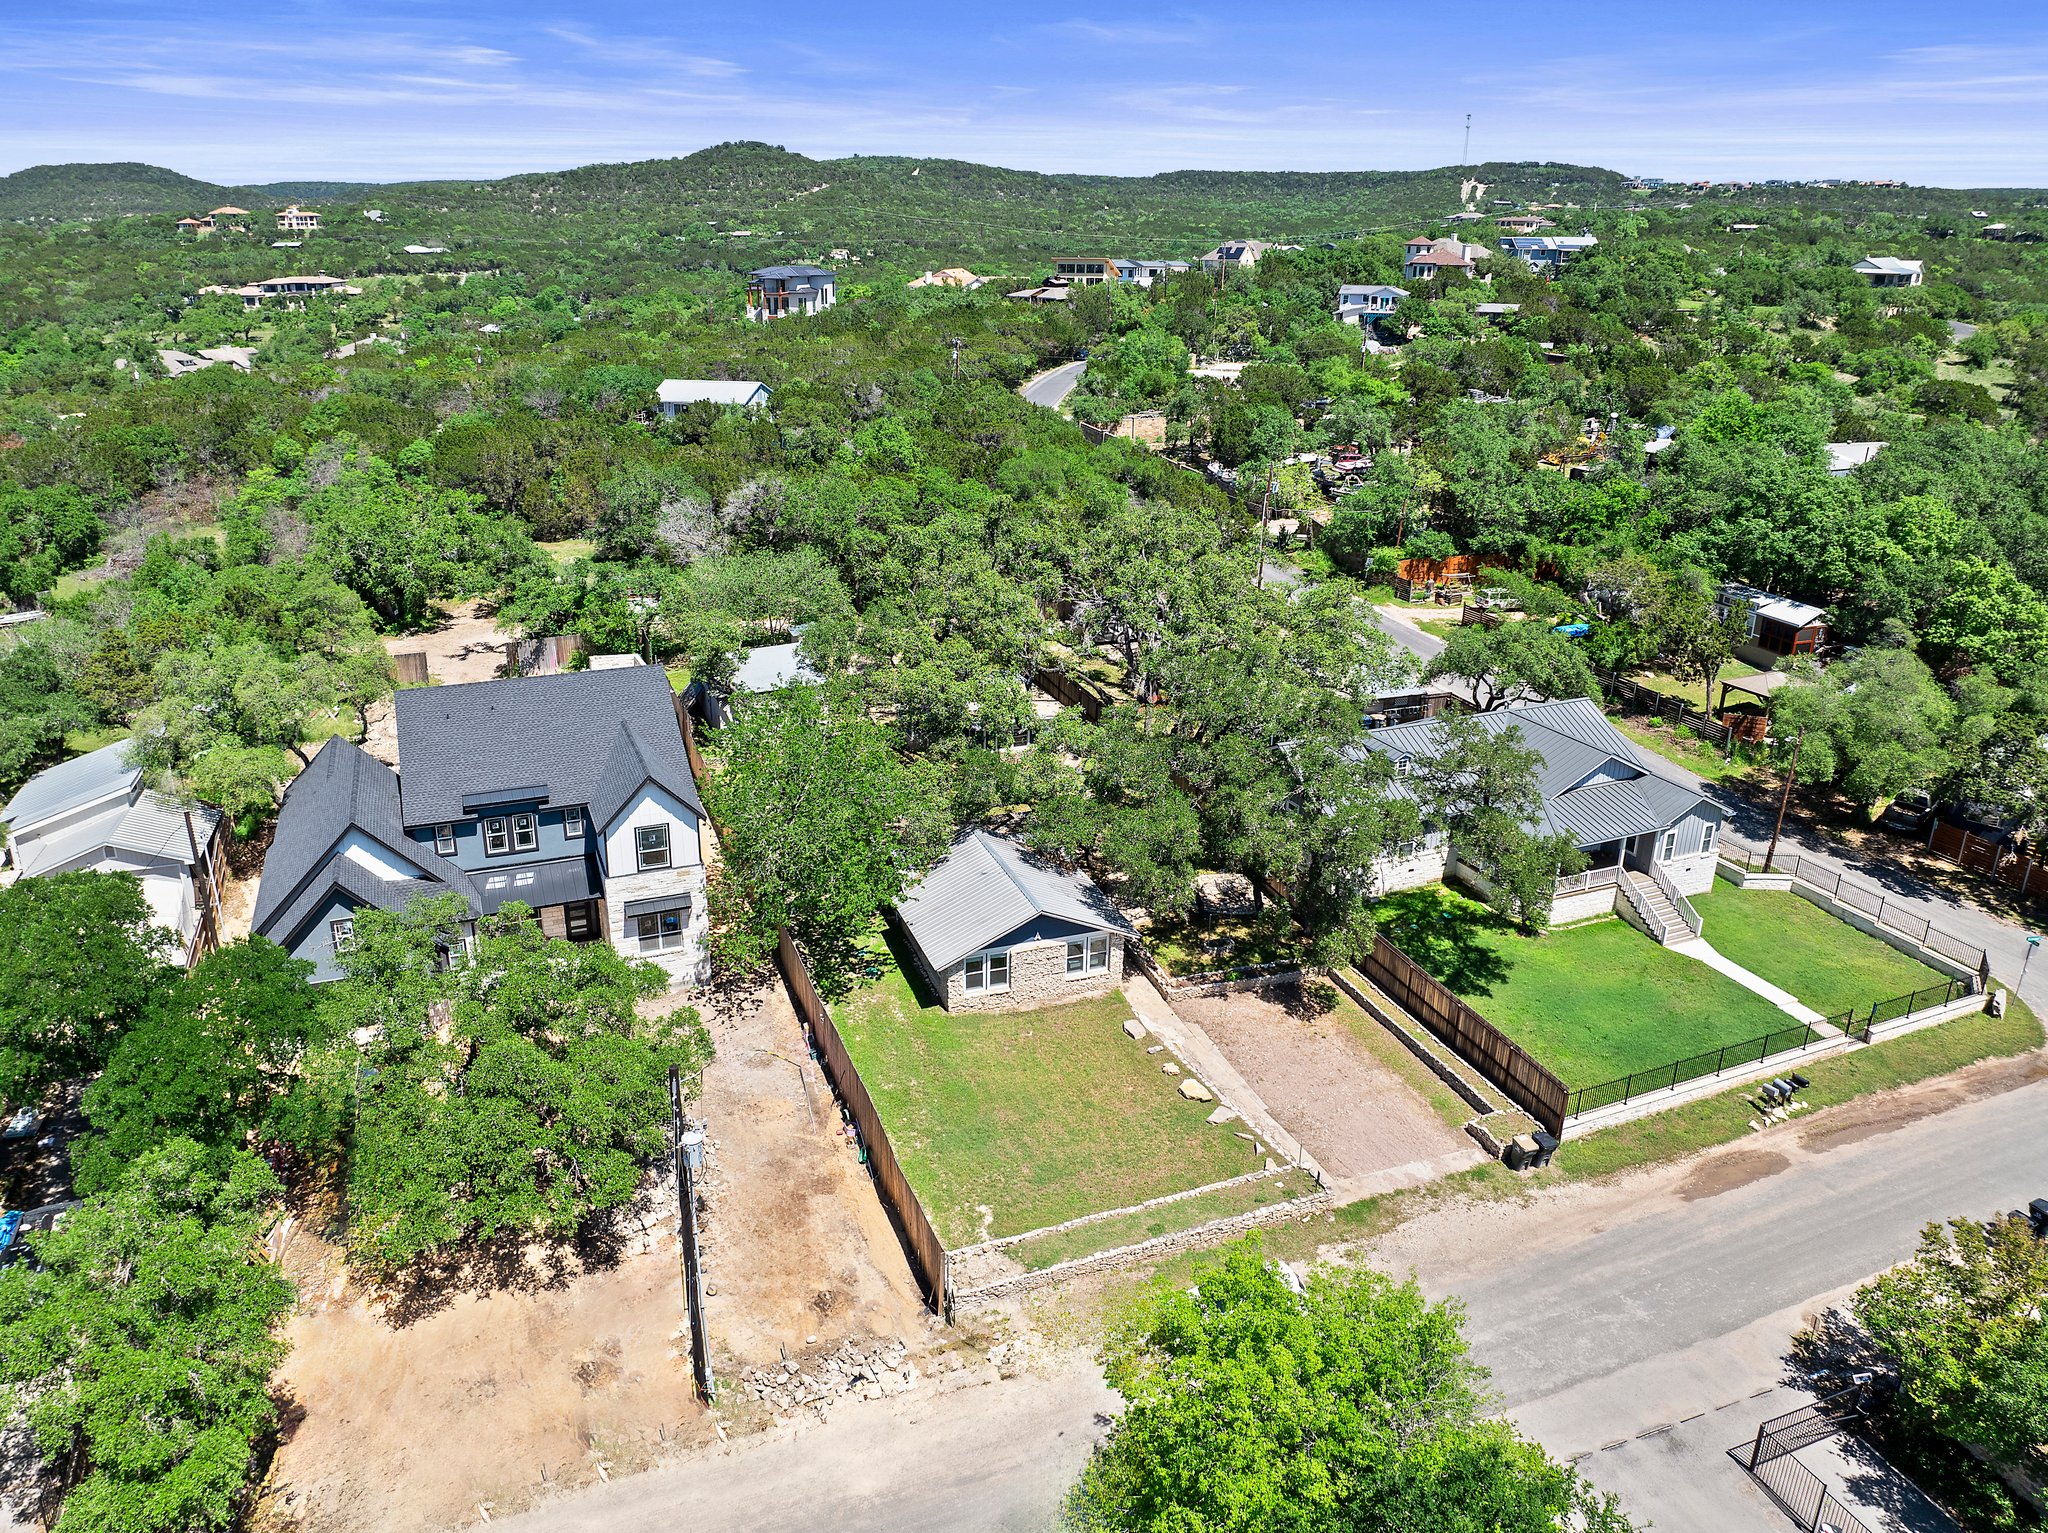 Live near Lake Travis! Great property with two houses! The property is the one in the middle.